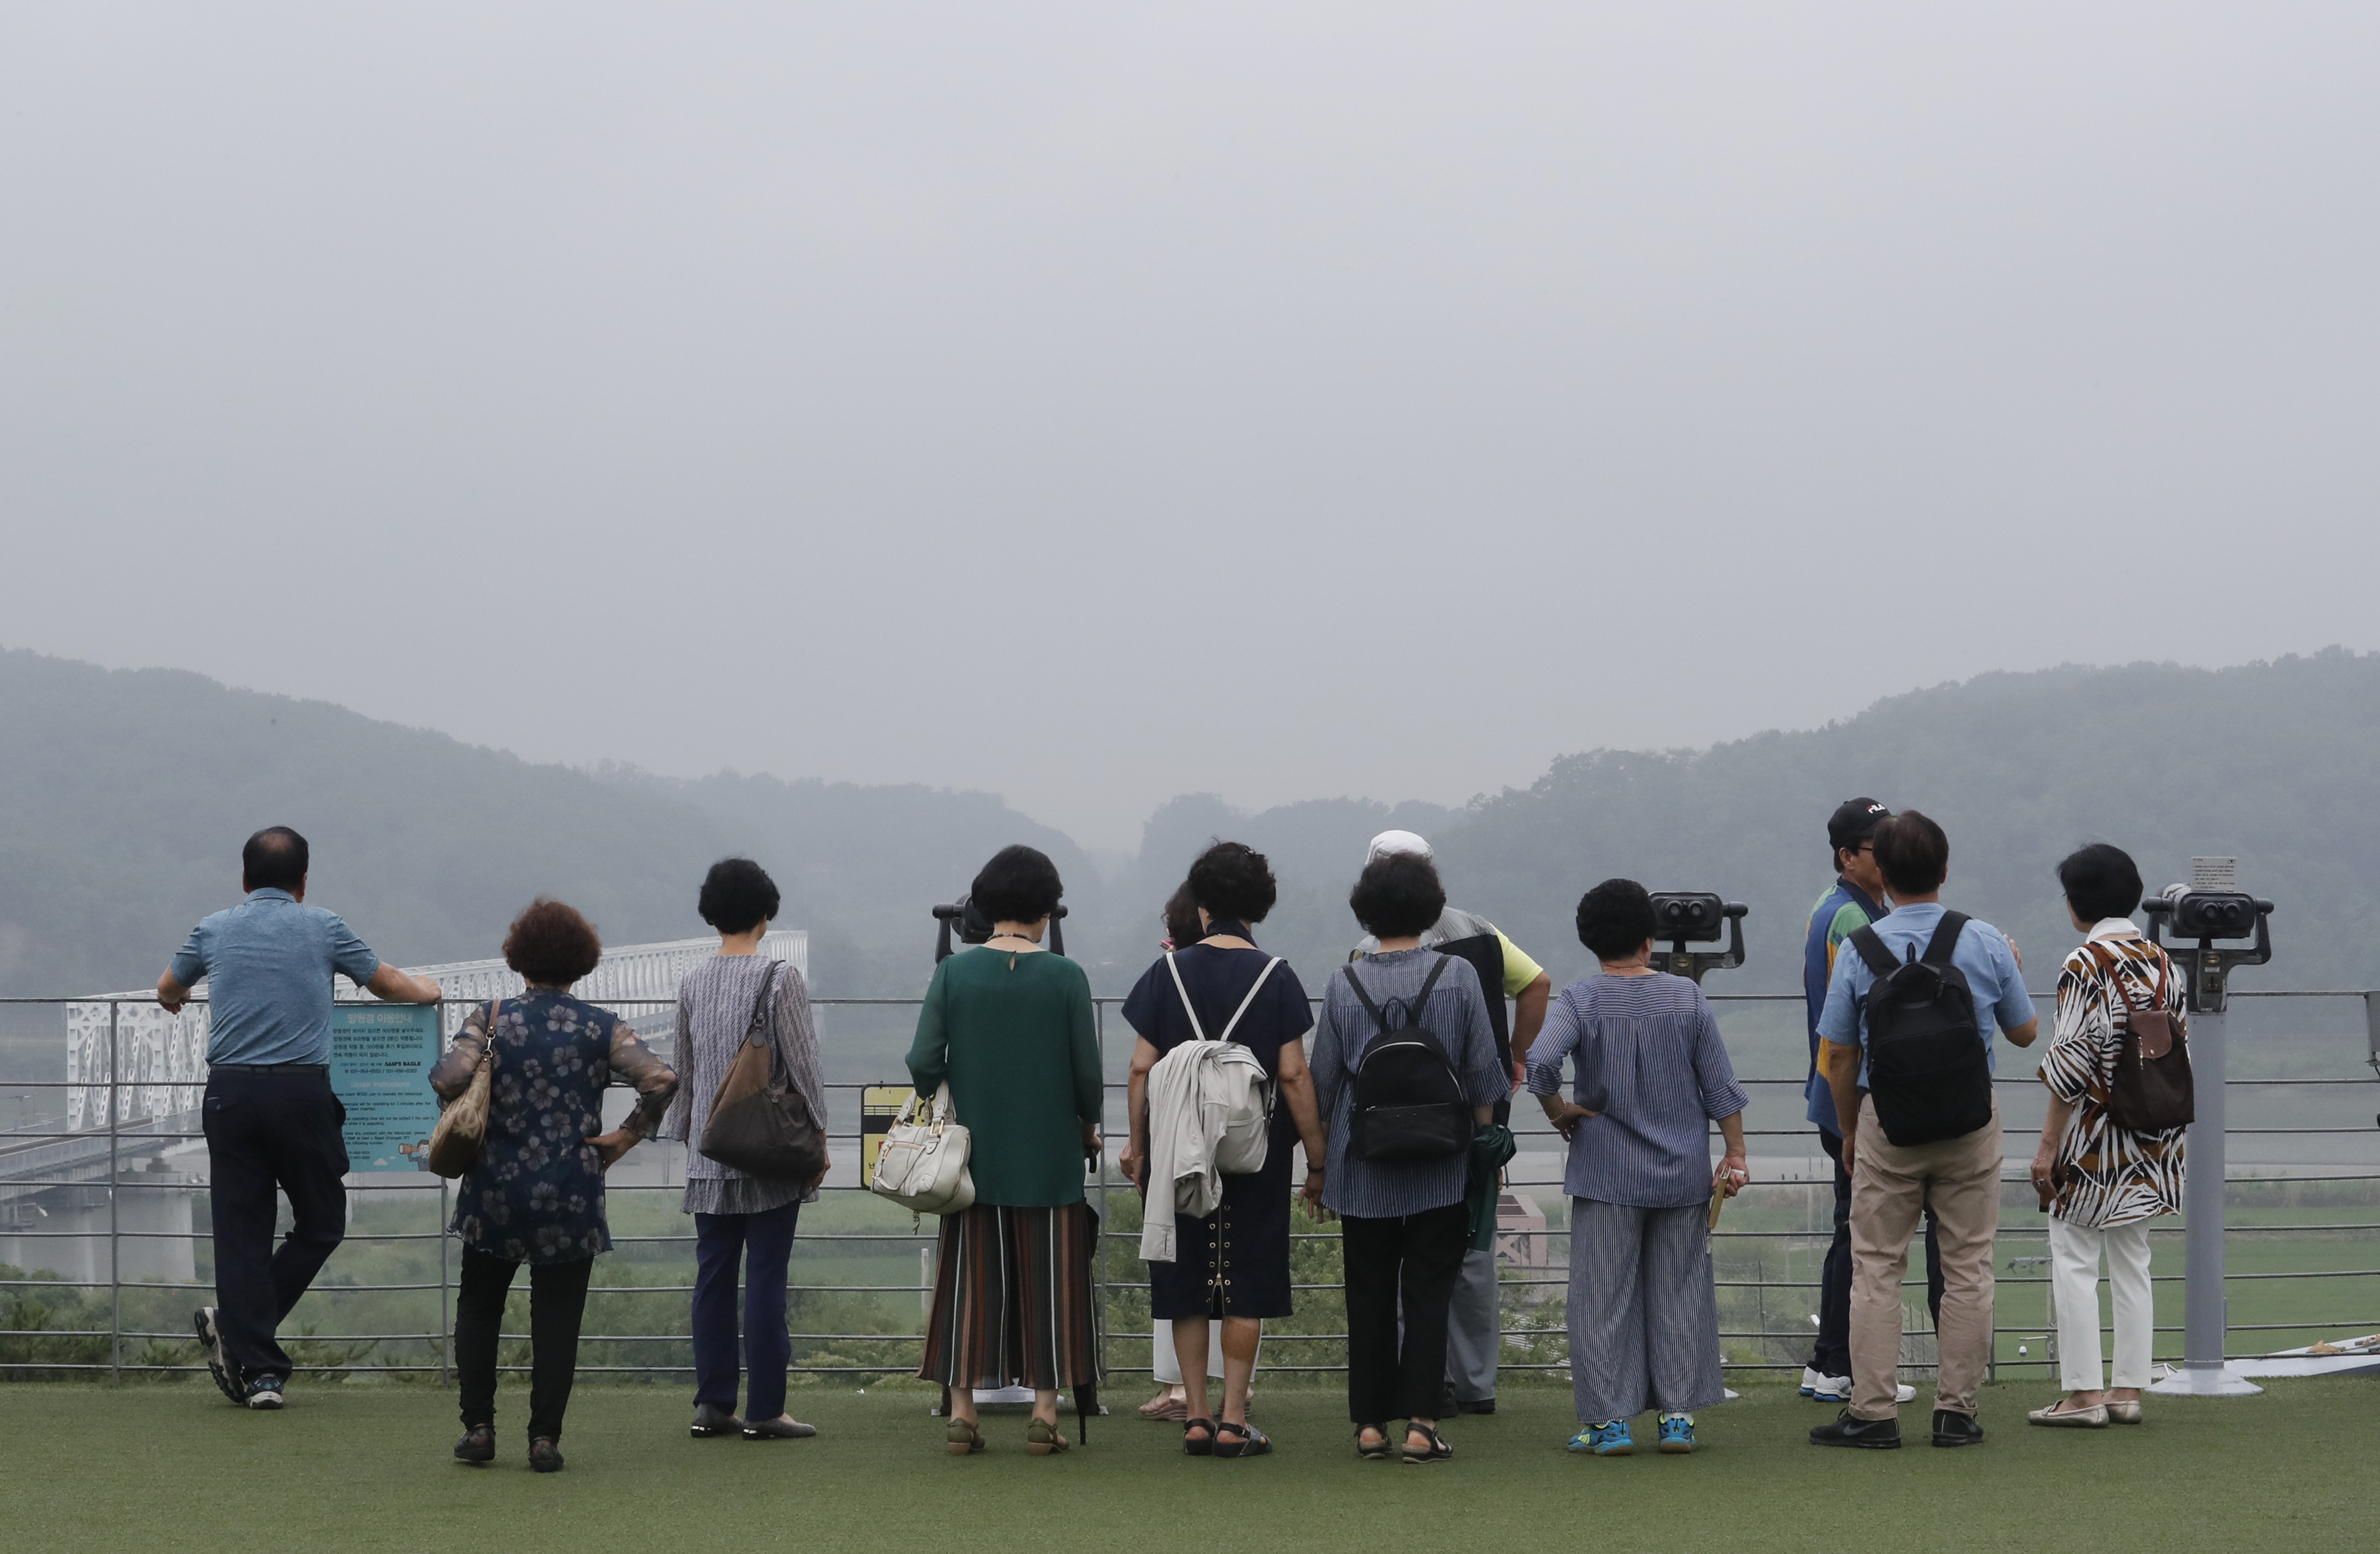 Visitors watch the North Korean side at the Imjingak Pavilion in Paju, South Korea, near the border with North Korea, Thursday, July 25, 2019. North Korea fired two short-range missiles into the sea Thursday, South Korea's military said, the first weapons launches in more than two months and an apparent pressuring tactic aimed at Washington as North Korean and U.S. officials struggle to restart nuclear negotiations. (AP Photo/Ahn Young-joon)